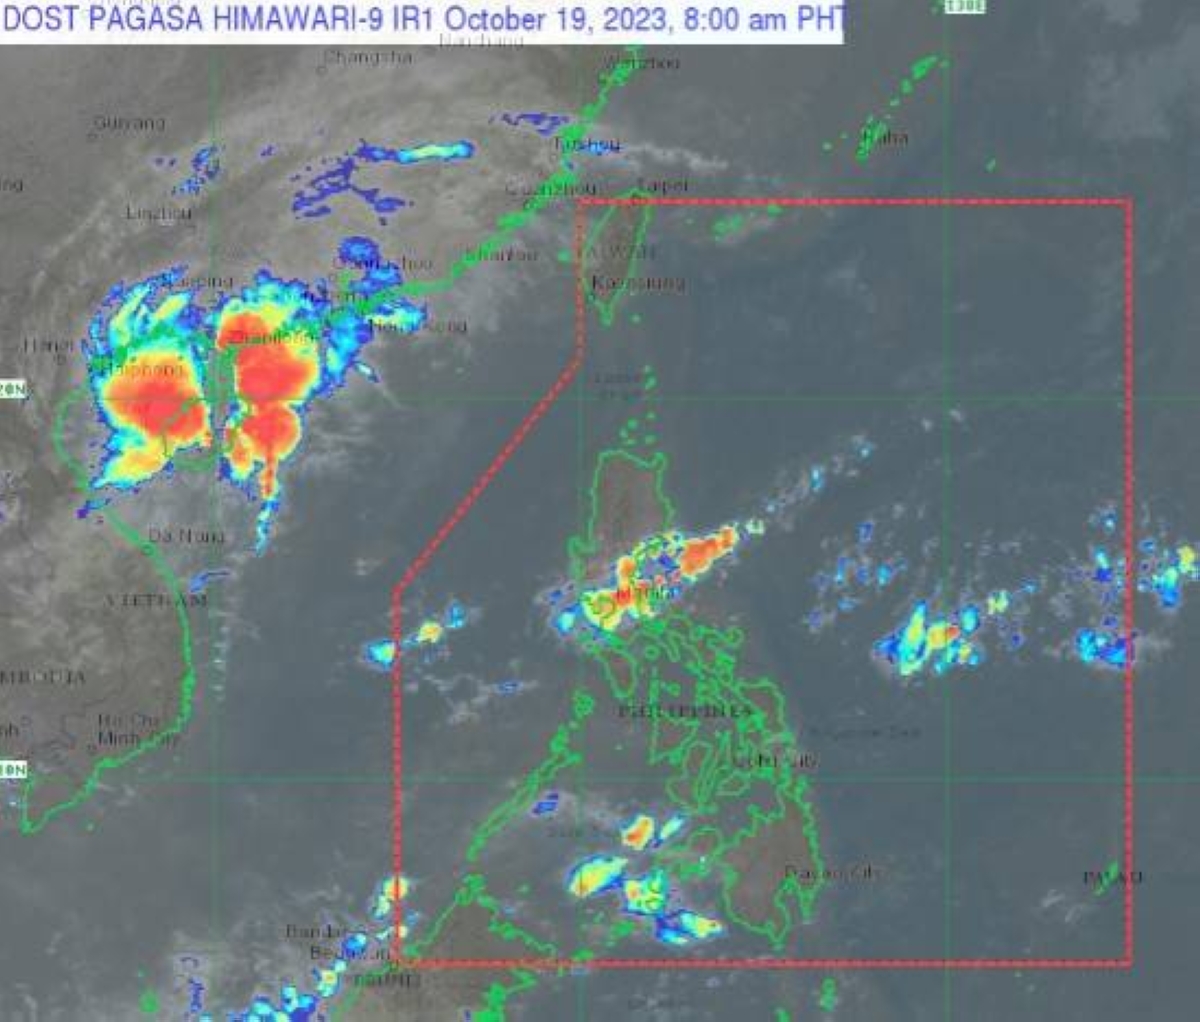 PHOTO From DOST PAGASA